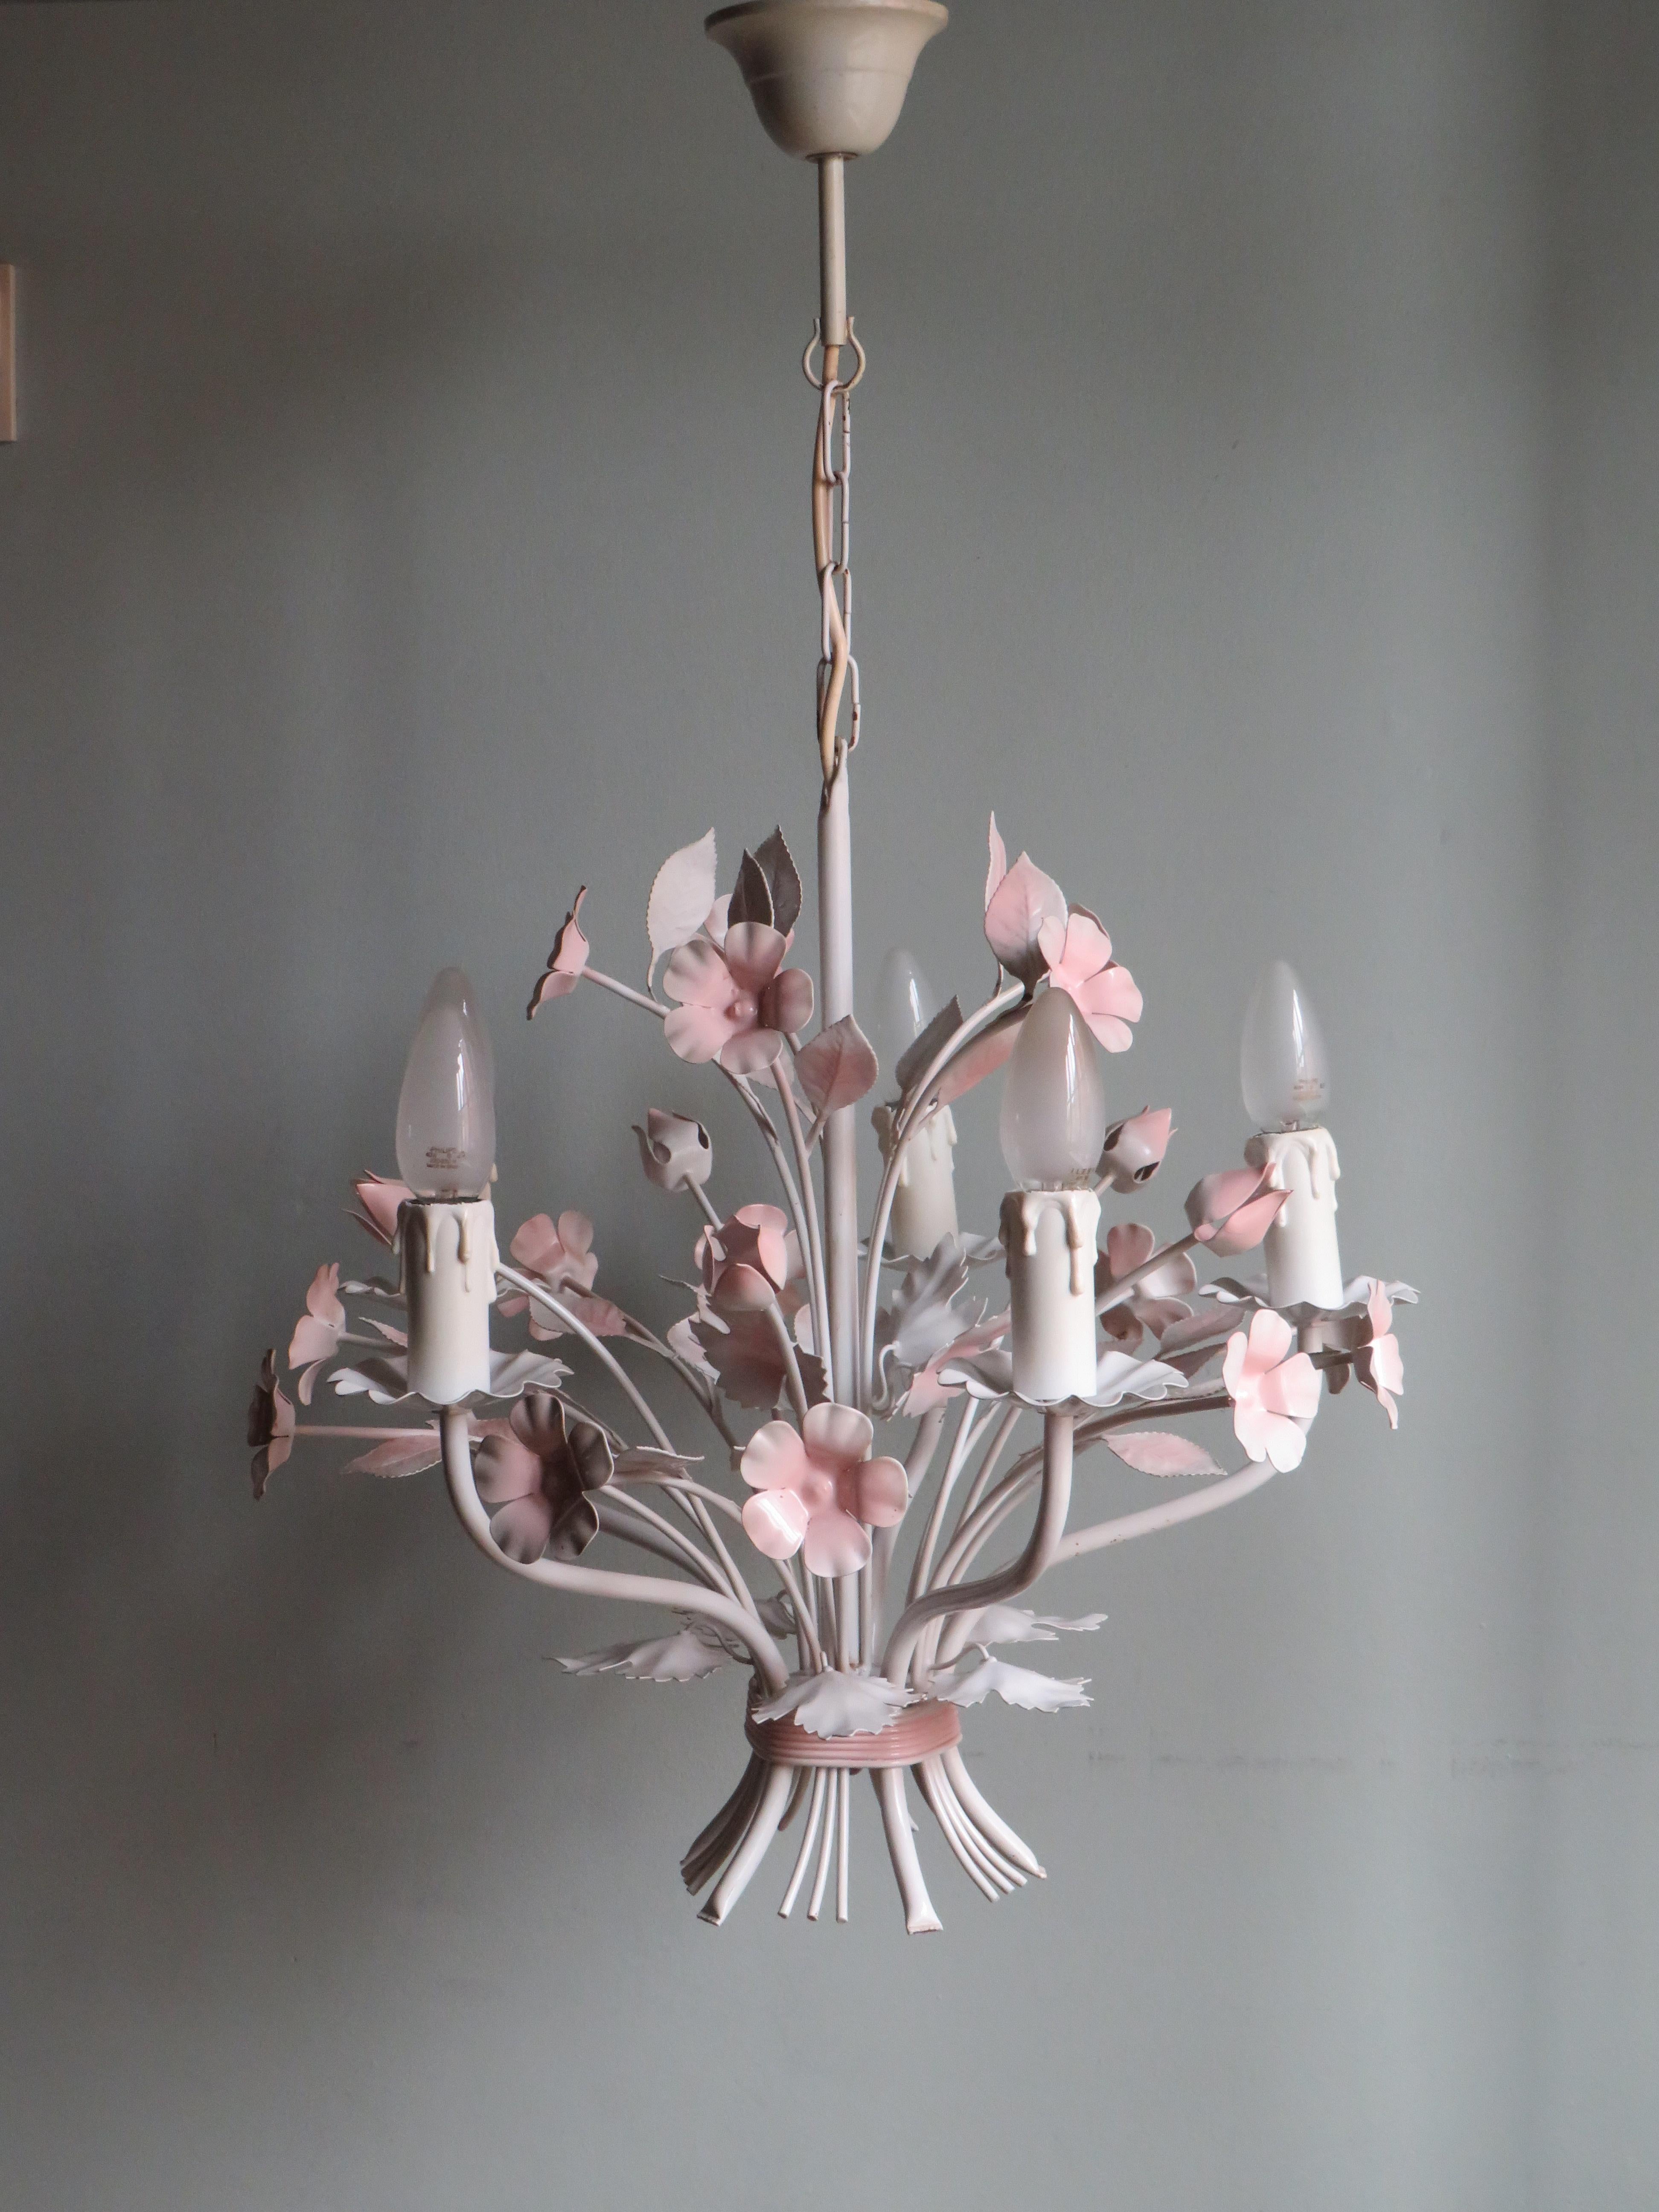 Painted Vintage Toleware Chandelier with Floral Motifs, Italy, 1960s For Sale